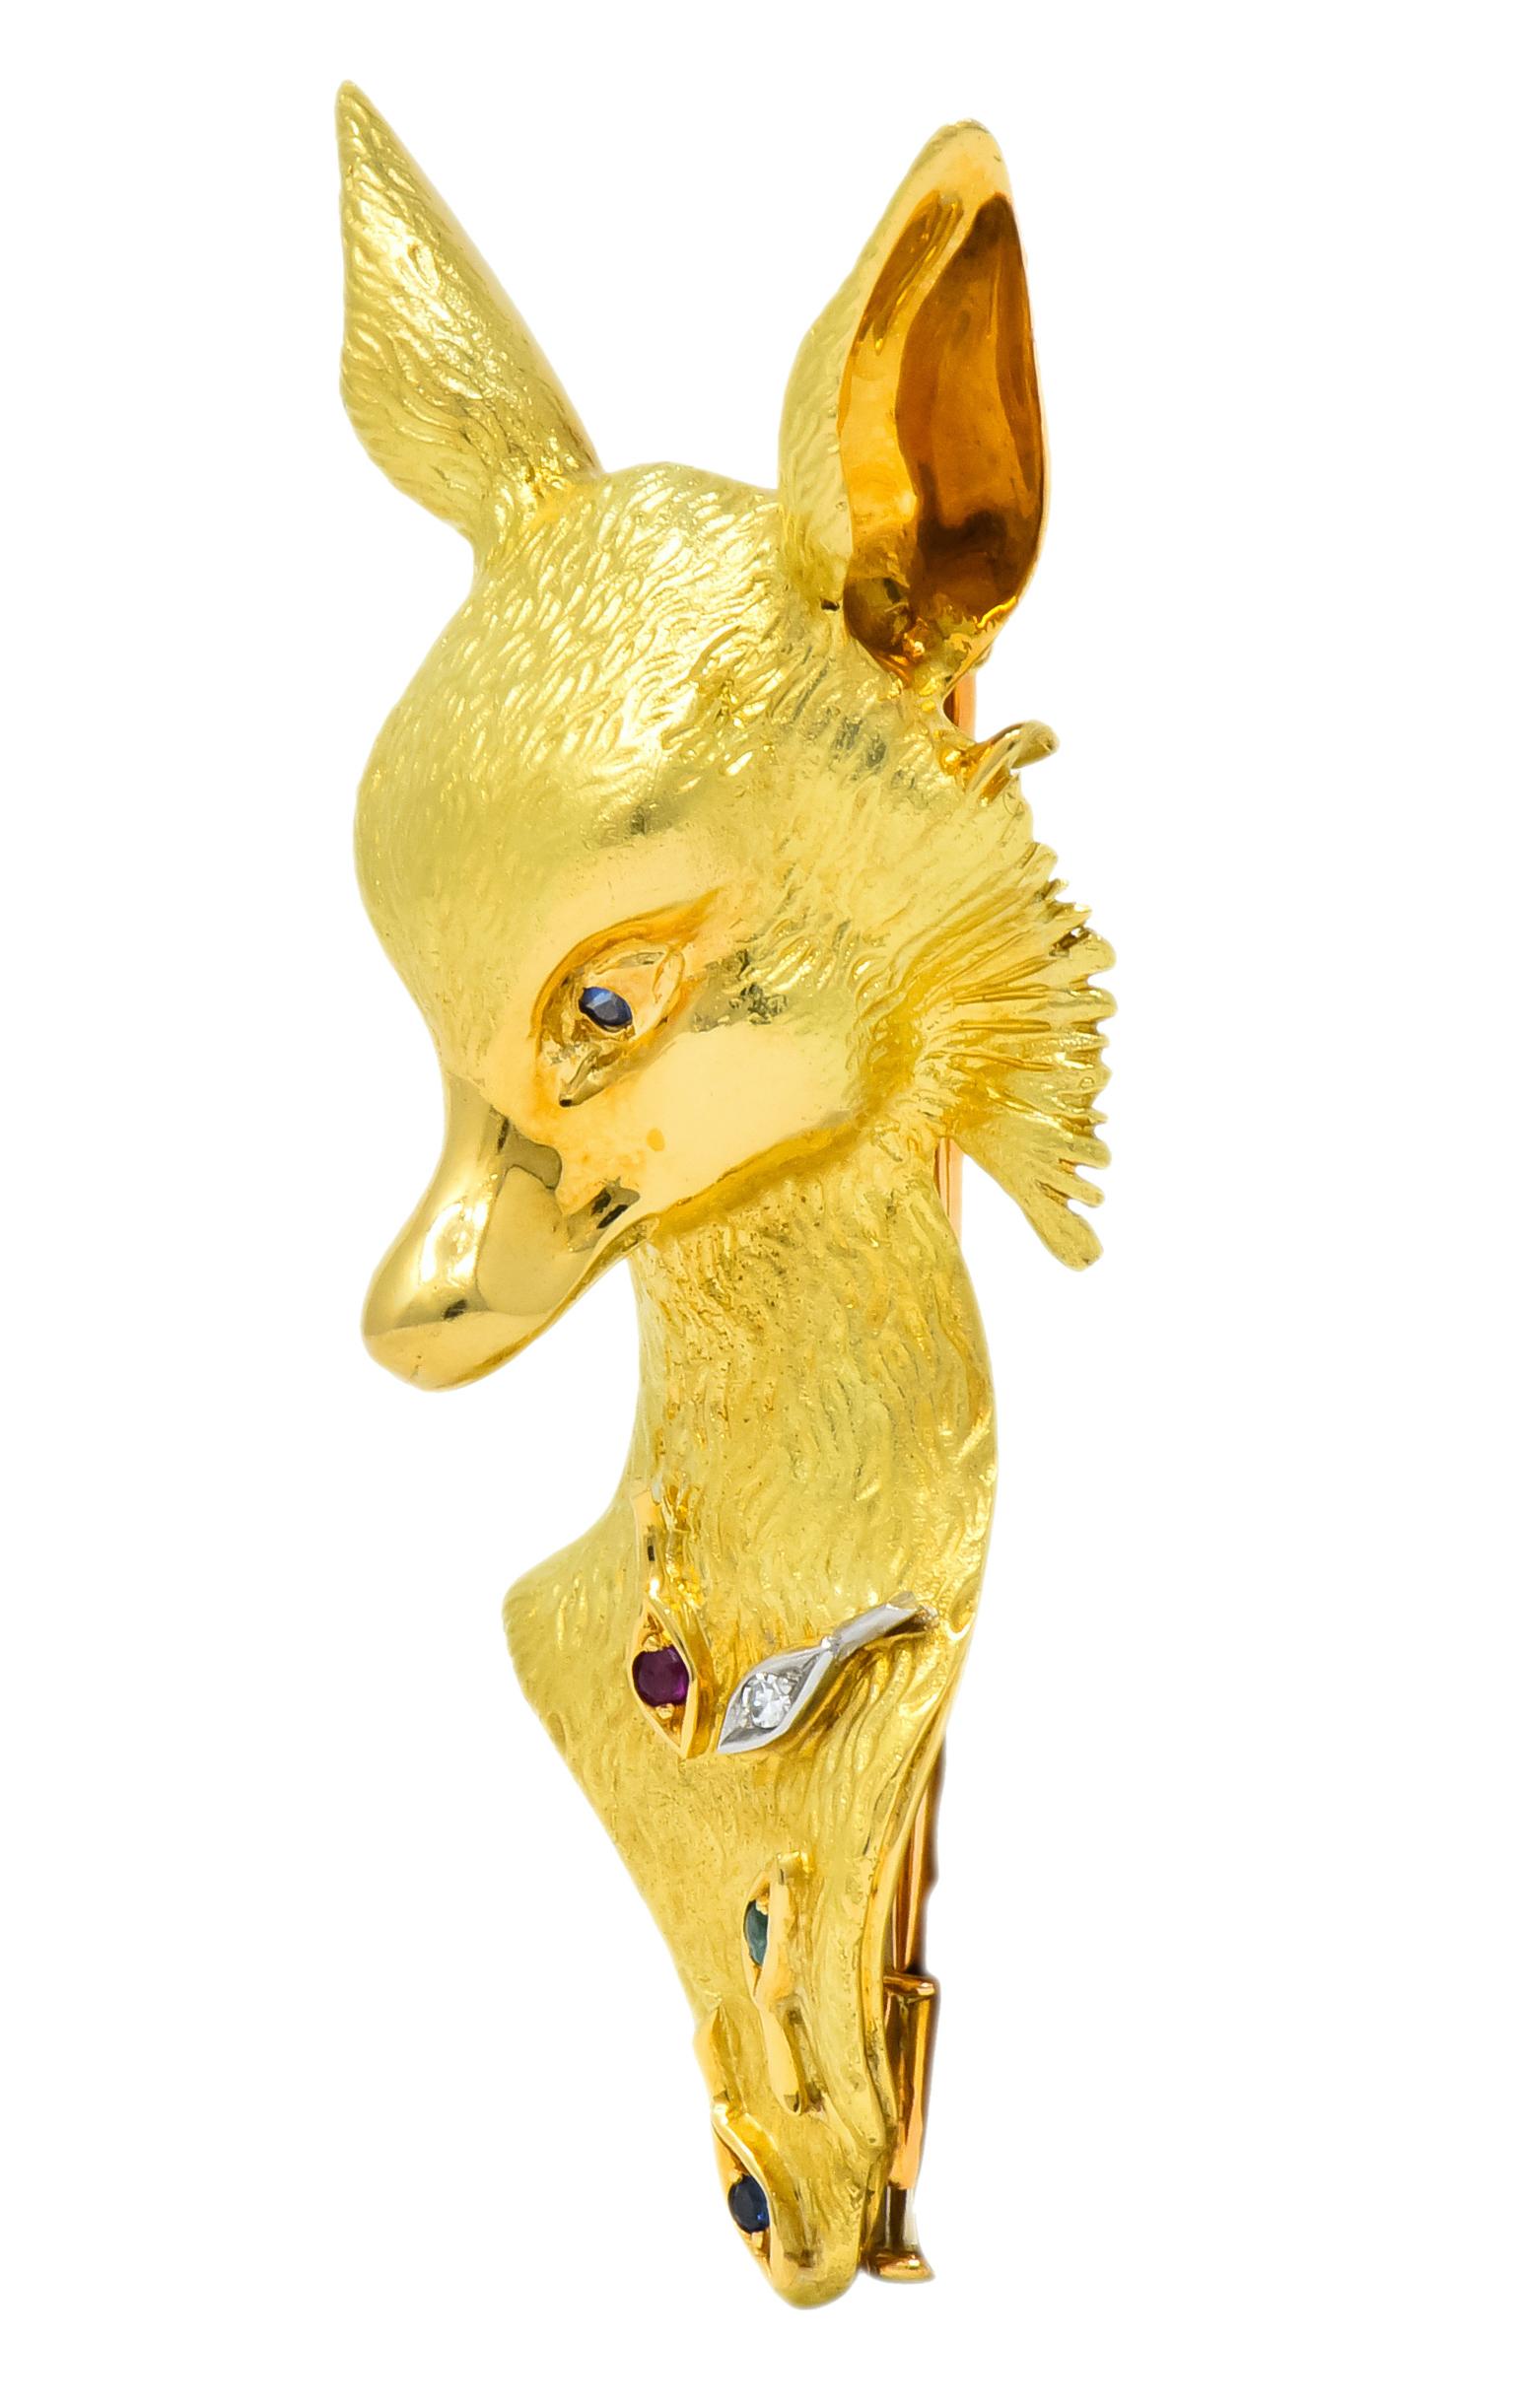 Designed as a sculpted fox with a textured gold finish as fur

Accented throughout by round cut ruby, emerald, sapphire, and single cut diamond

Completed by double pin stem and locking barrel closure

Tested as 18 karat gold

Circa 1960

Marked